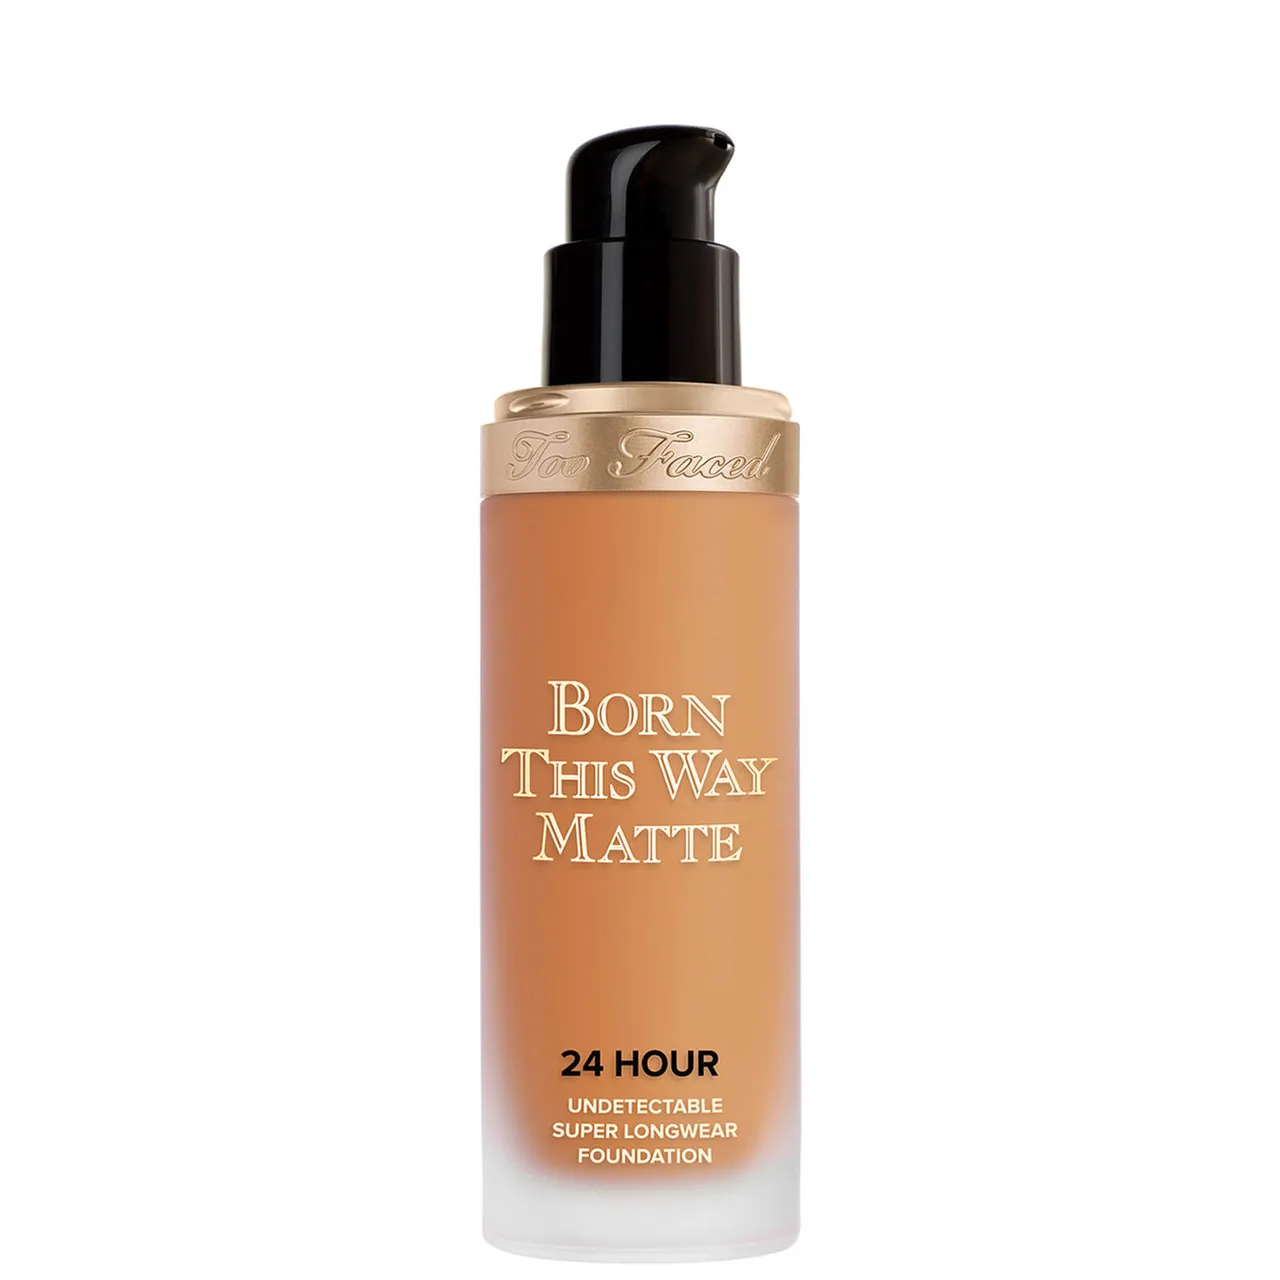 Too Faced Born This Way Matte 24 Hour Long-Wear Foundation 30ml (Various Shades) - Butter Pecan